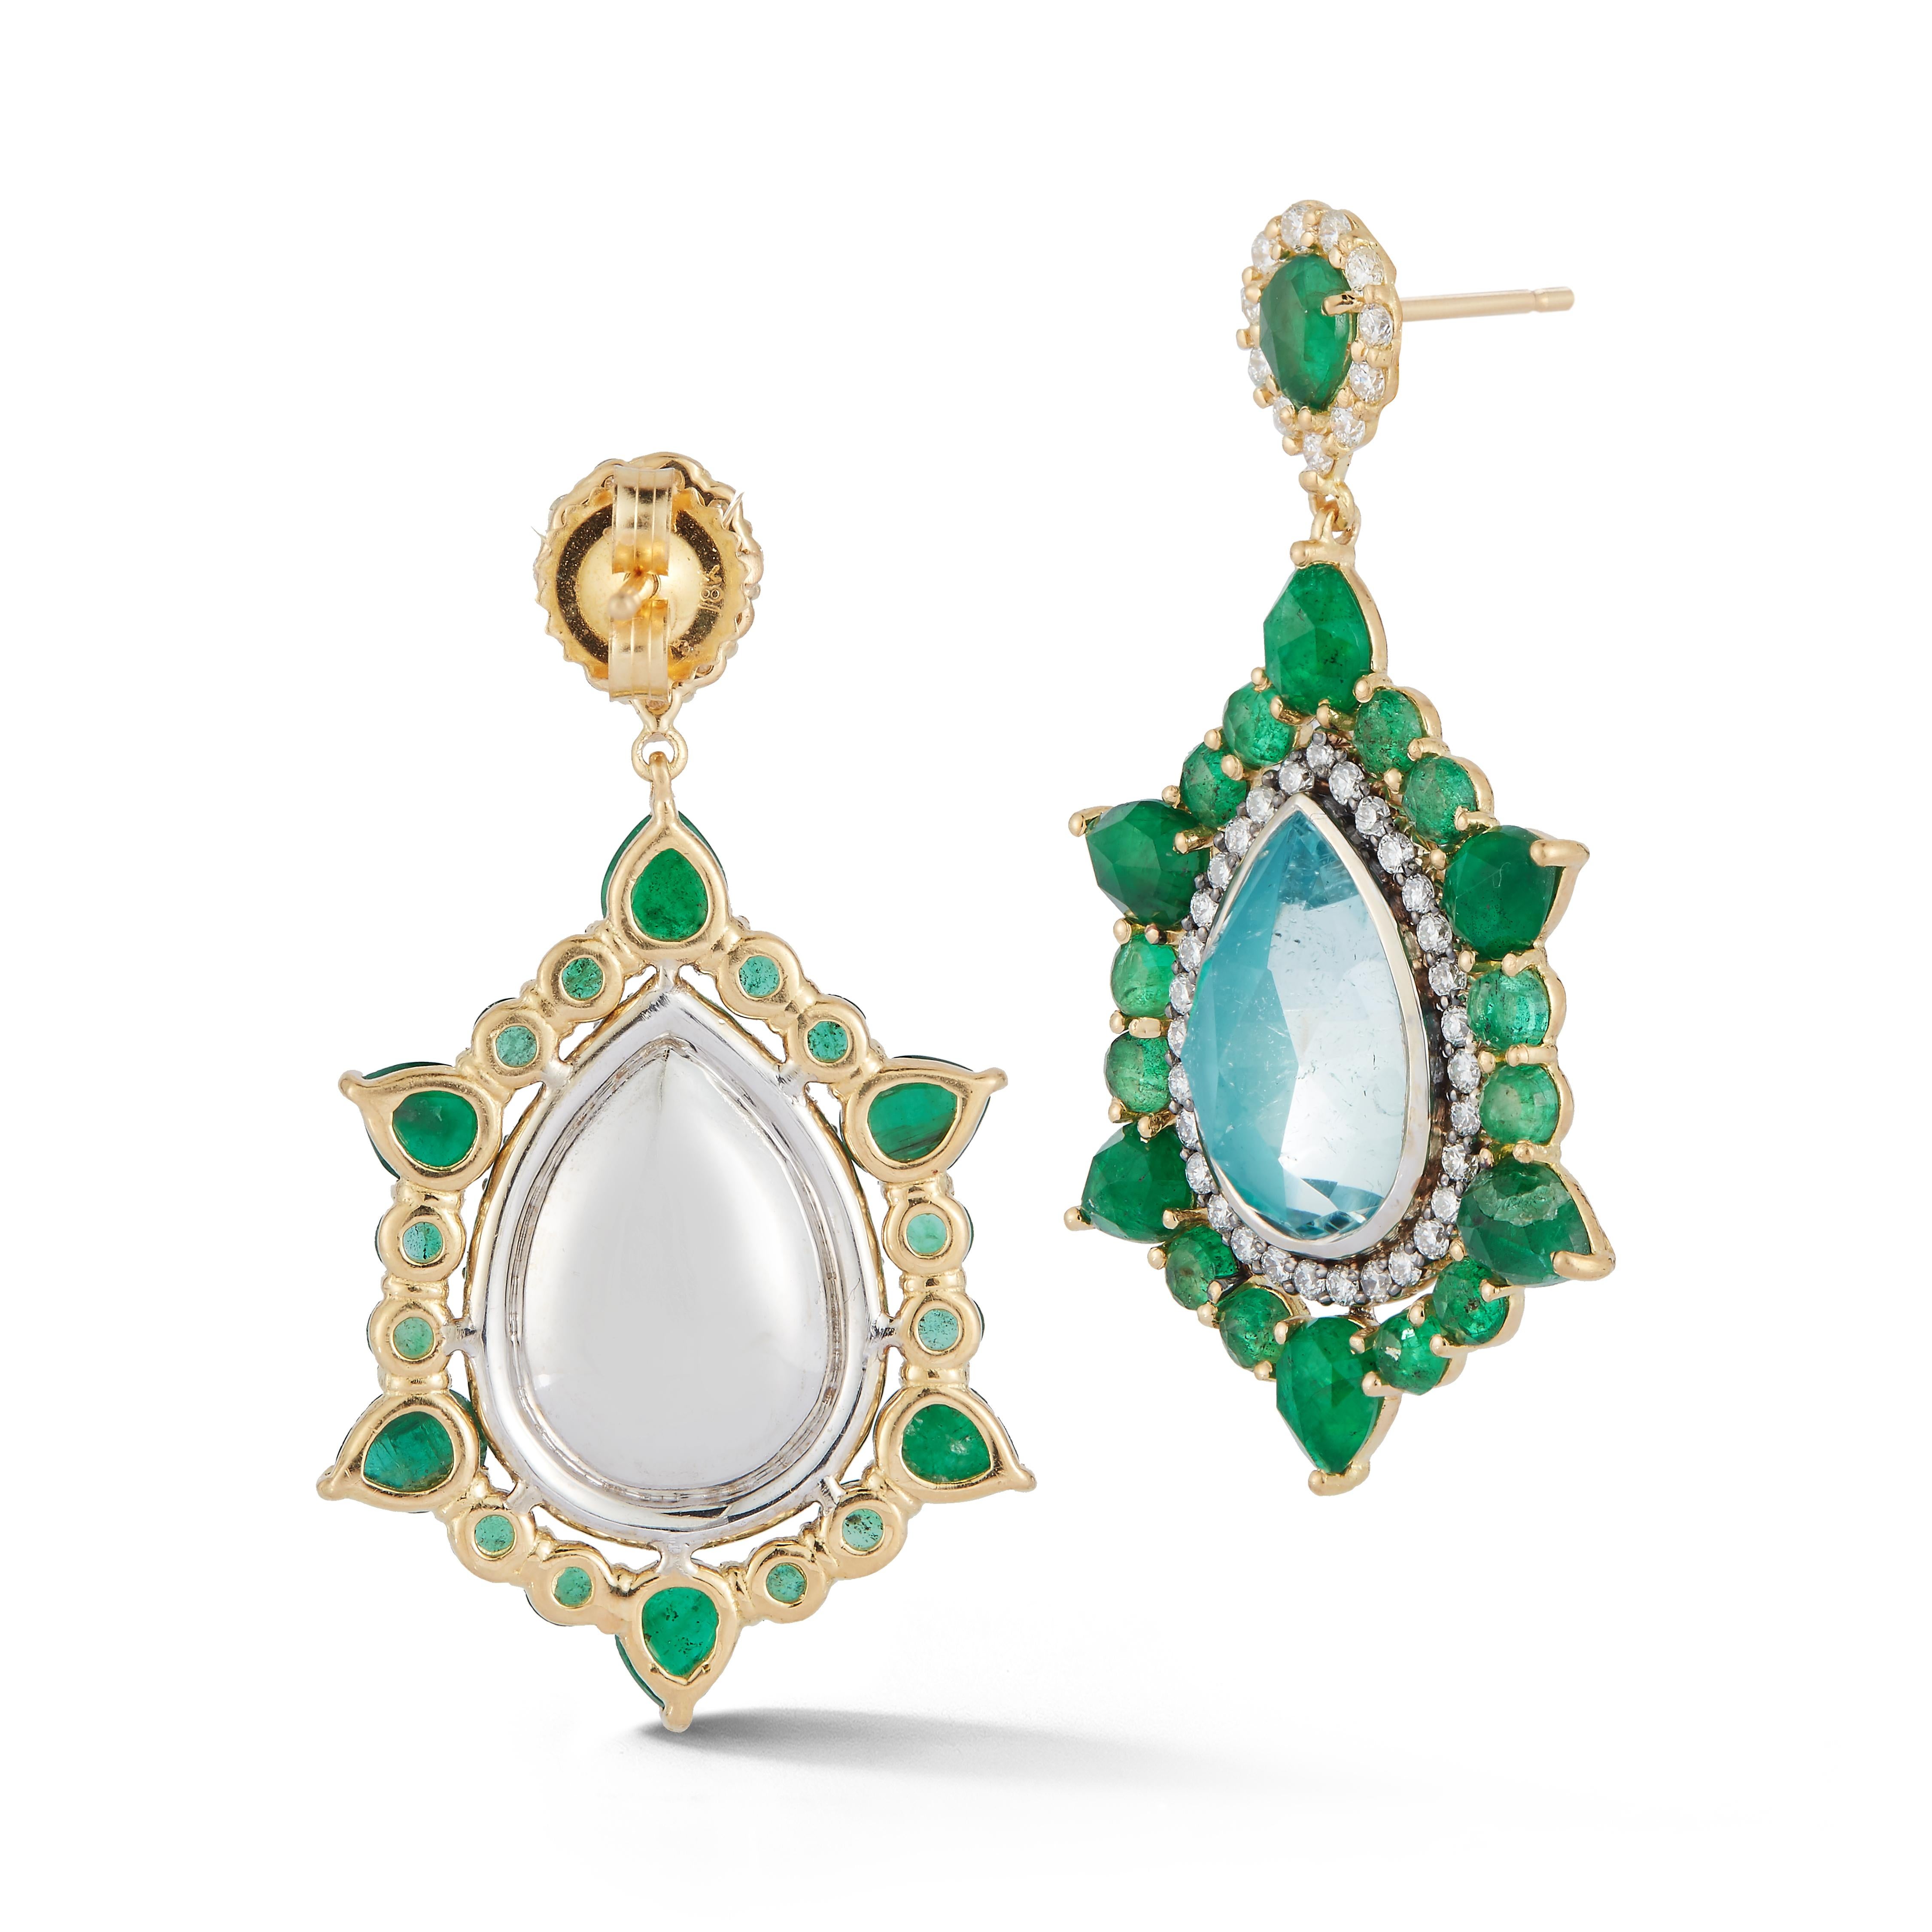 Parulina Couture Fine Jewelry- Emerald and Aquamarine Earrings from the Heaven and Earth Collection.
Beautiful earrings featuring 2 large Aquamarines 6.90ct and 5.74ct of Emeralds and accented with 0.94ct of Diamonds.
These earrings are set in 18K